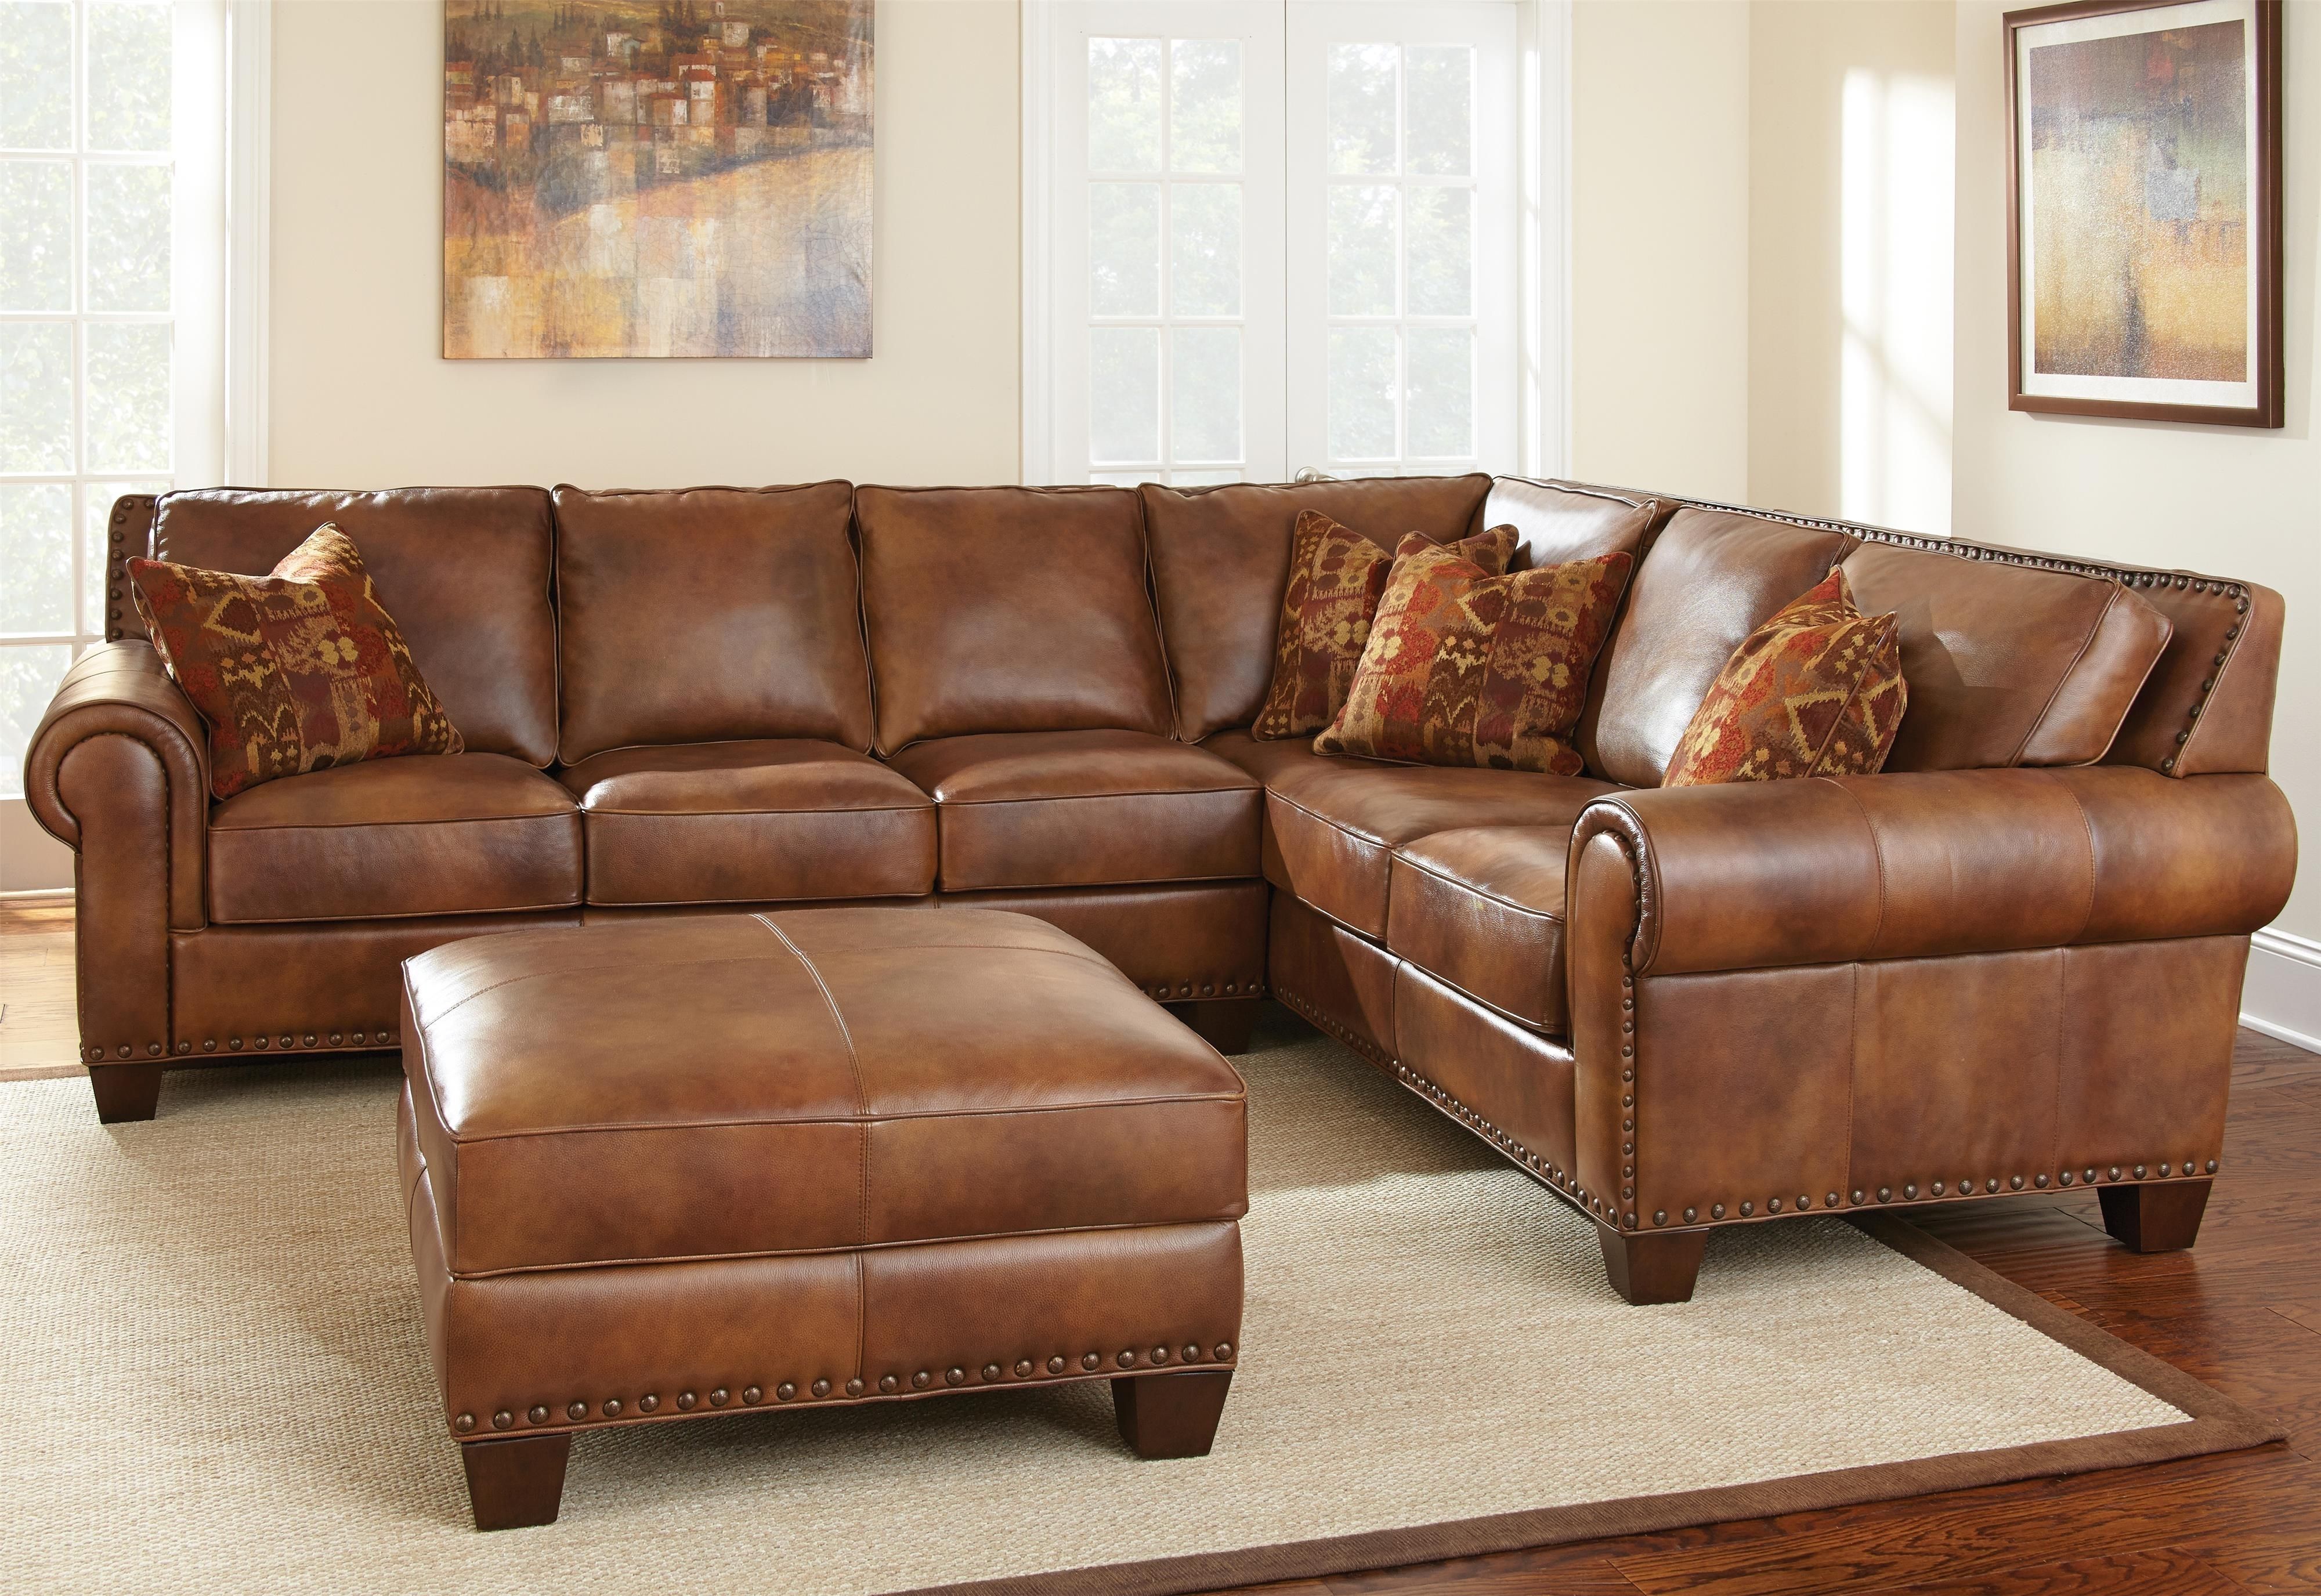 Steve Silver Silverado 2 Piece Sectional – Item Number: Sr960ral+laf Inside Ivan Smith Sectional Sofas (Photo 6 of 10)